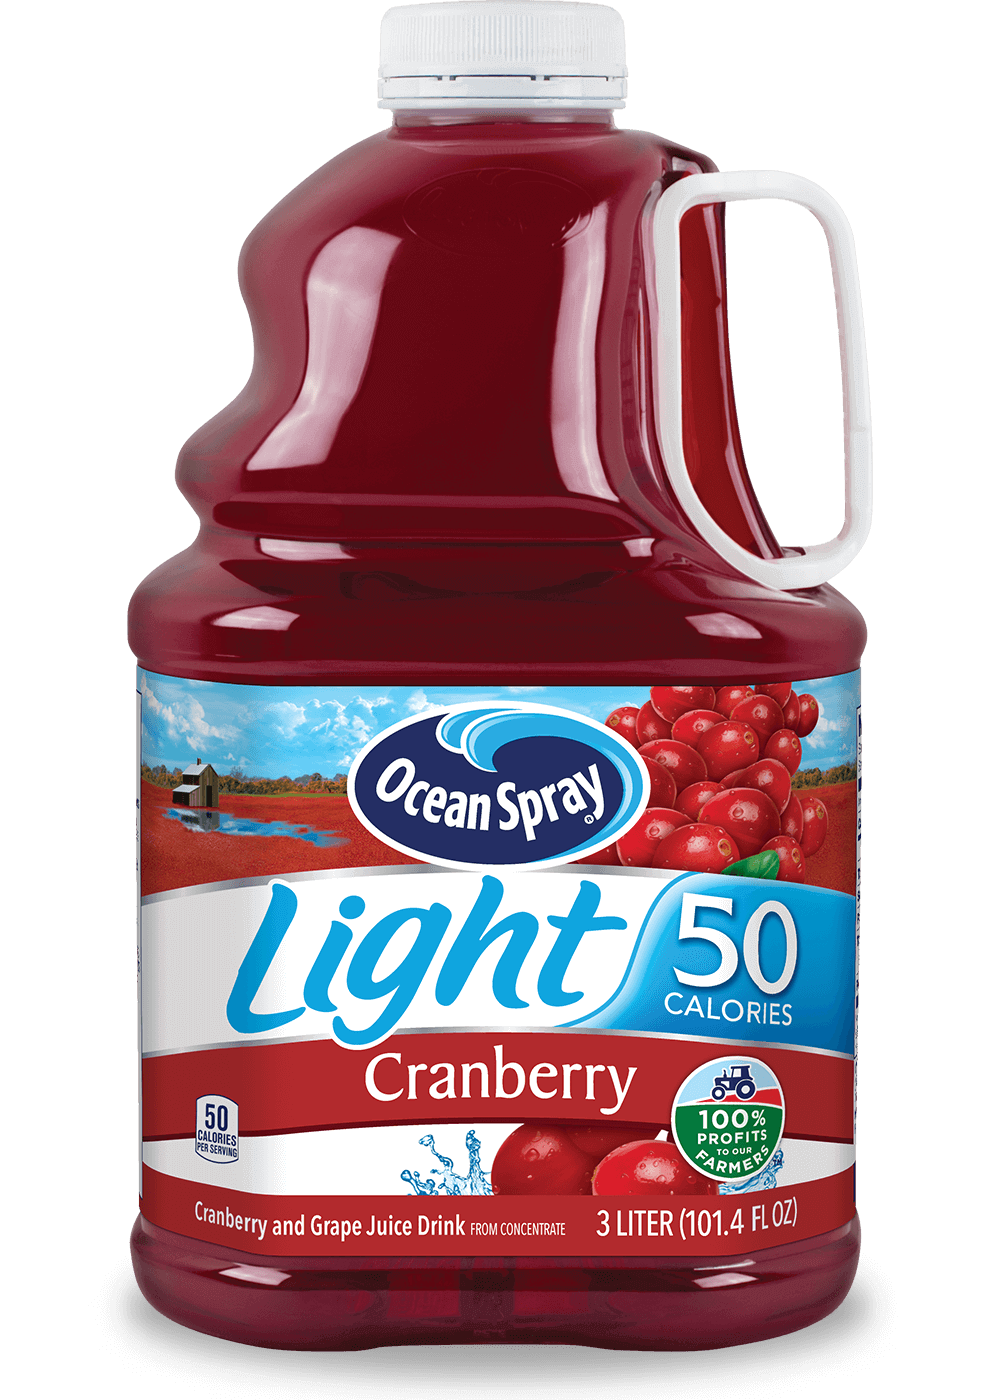 Light Cranberry & Concord Grape flavored Juice Drink